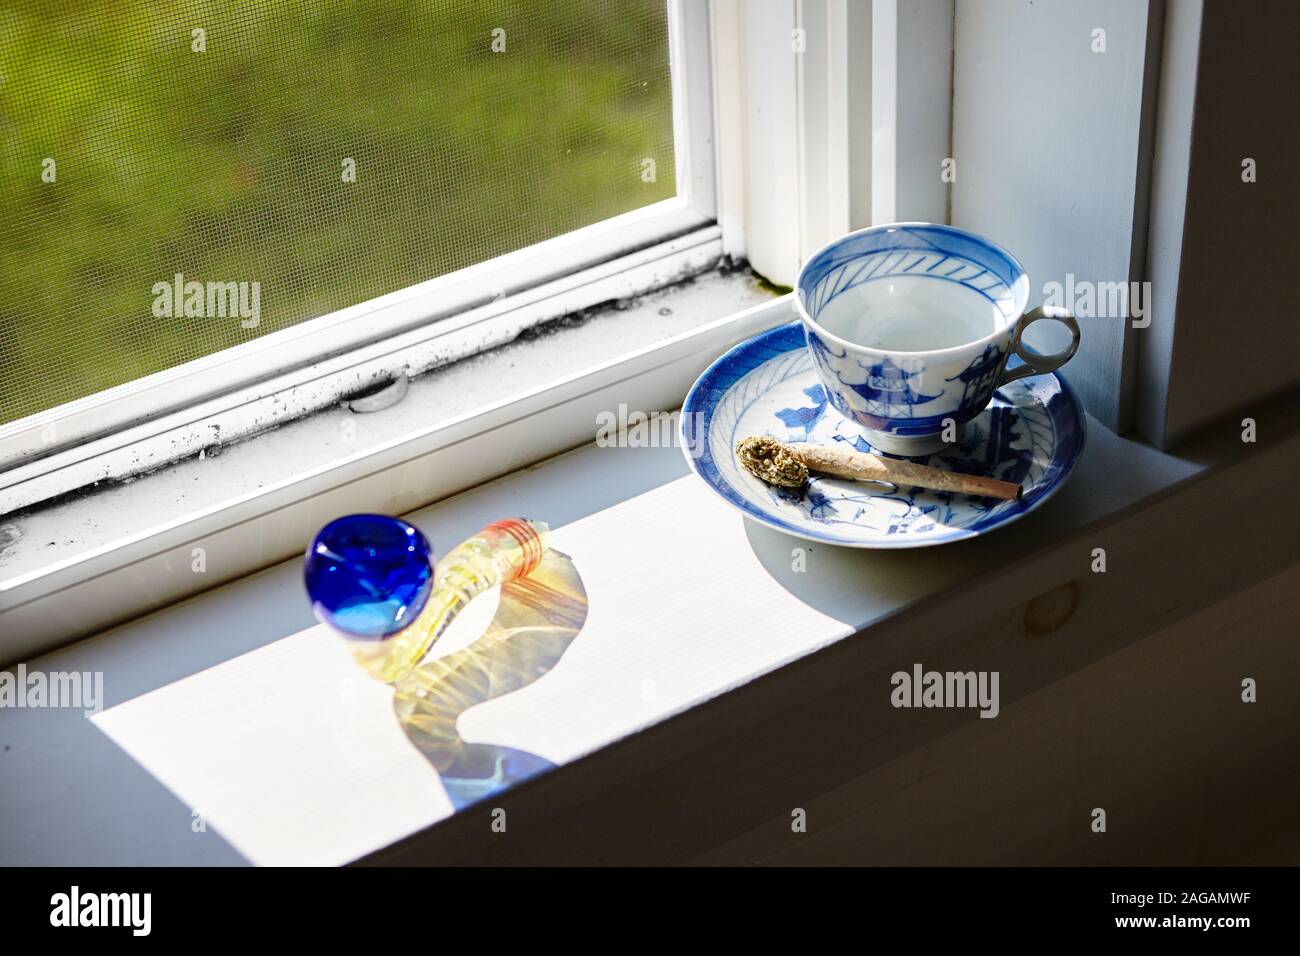 Download A High Angle Shot Of A Marijuana Blunt And Dry Cannabis On A Coffee Cup Near The Window Stock Photo Alamy Yellowimages Mockups